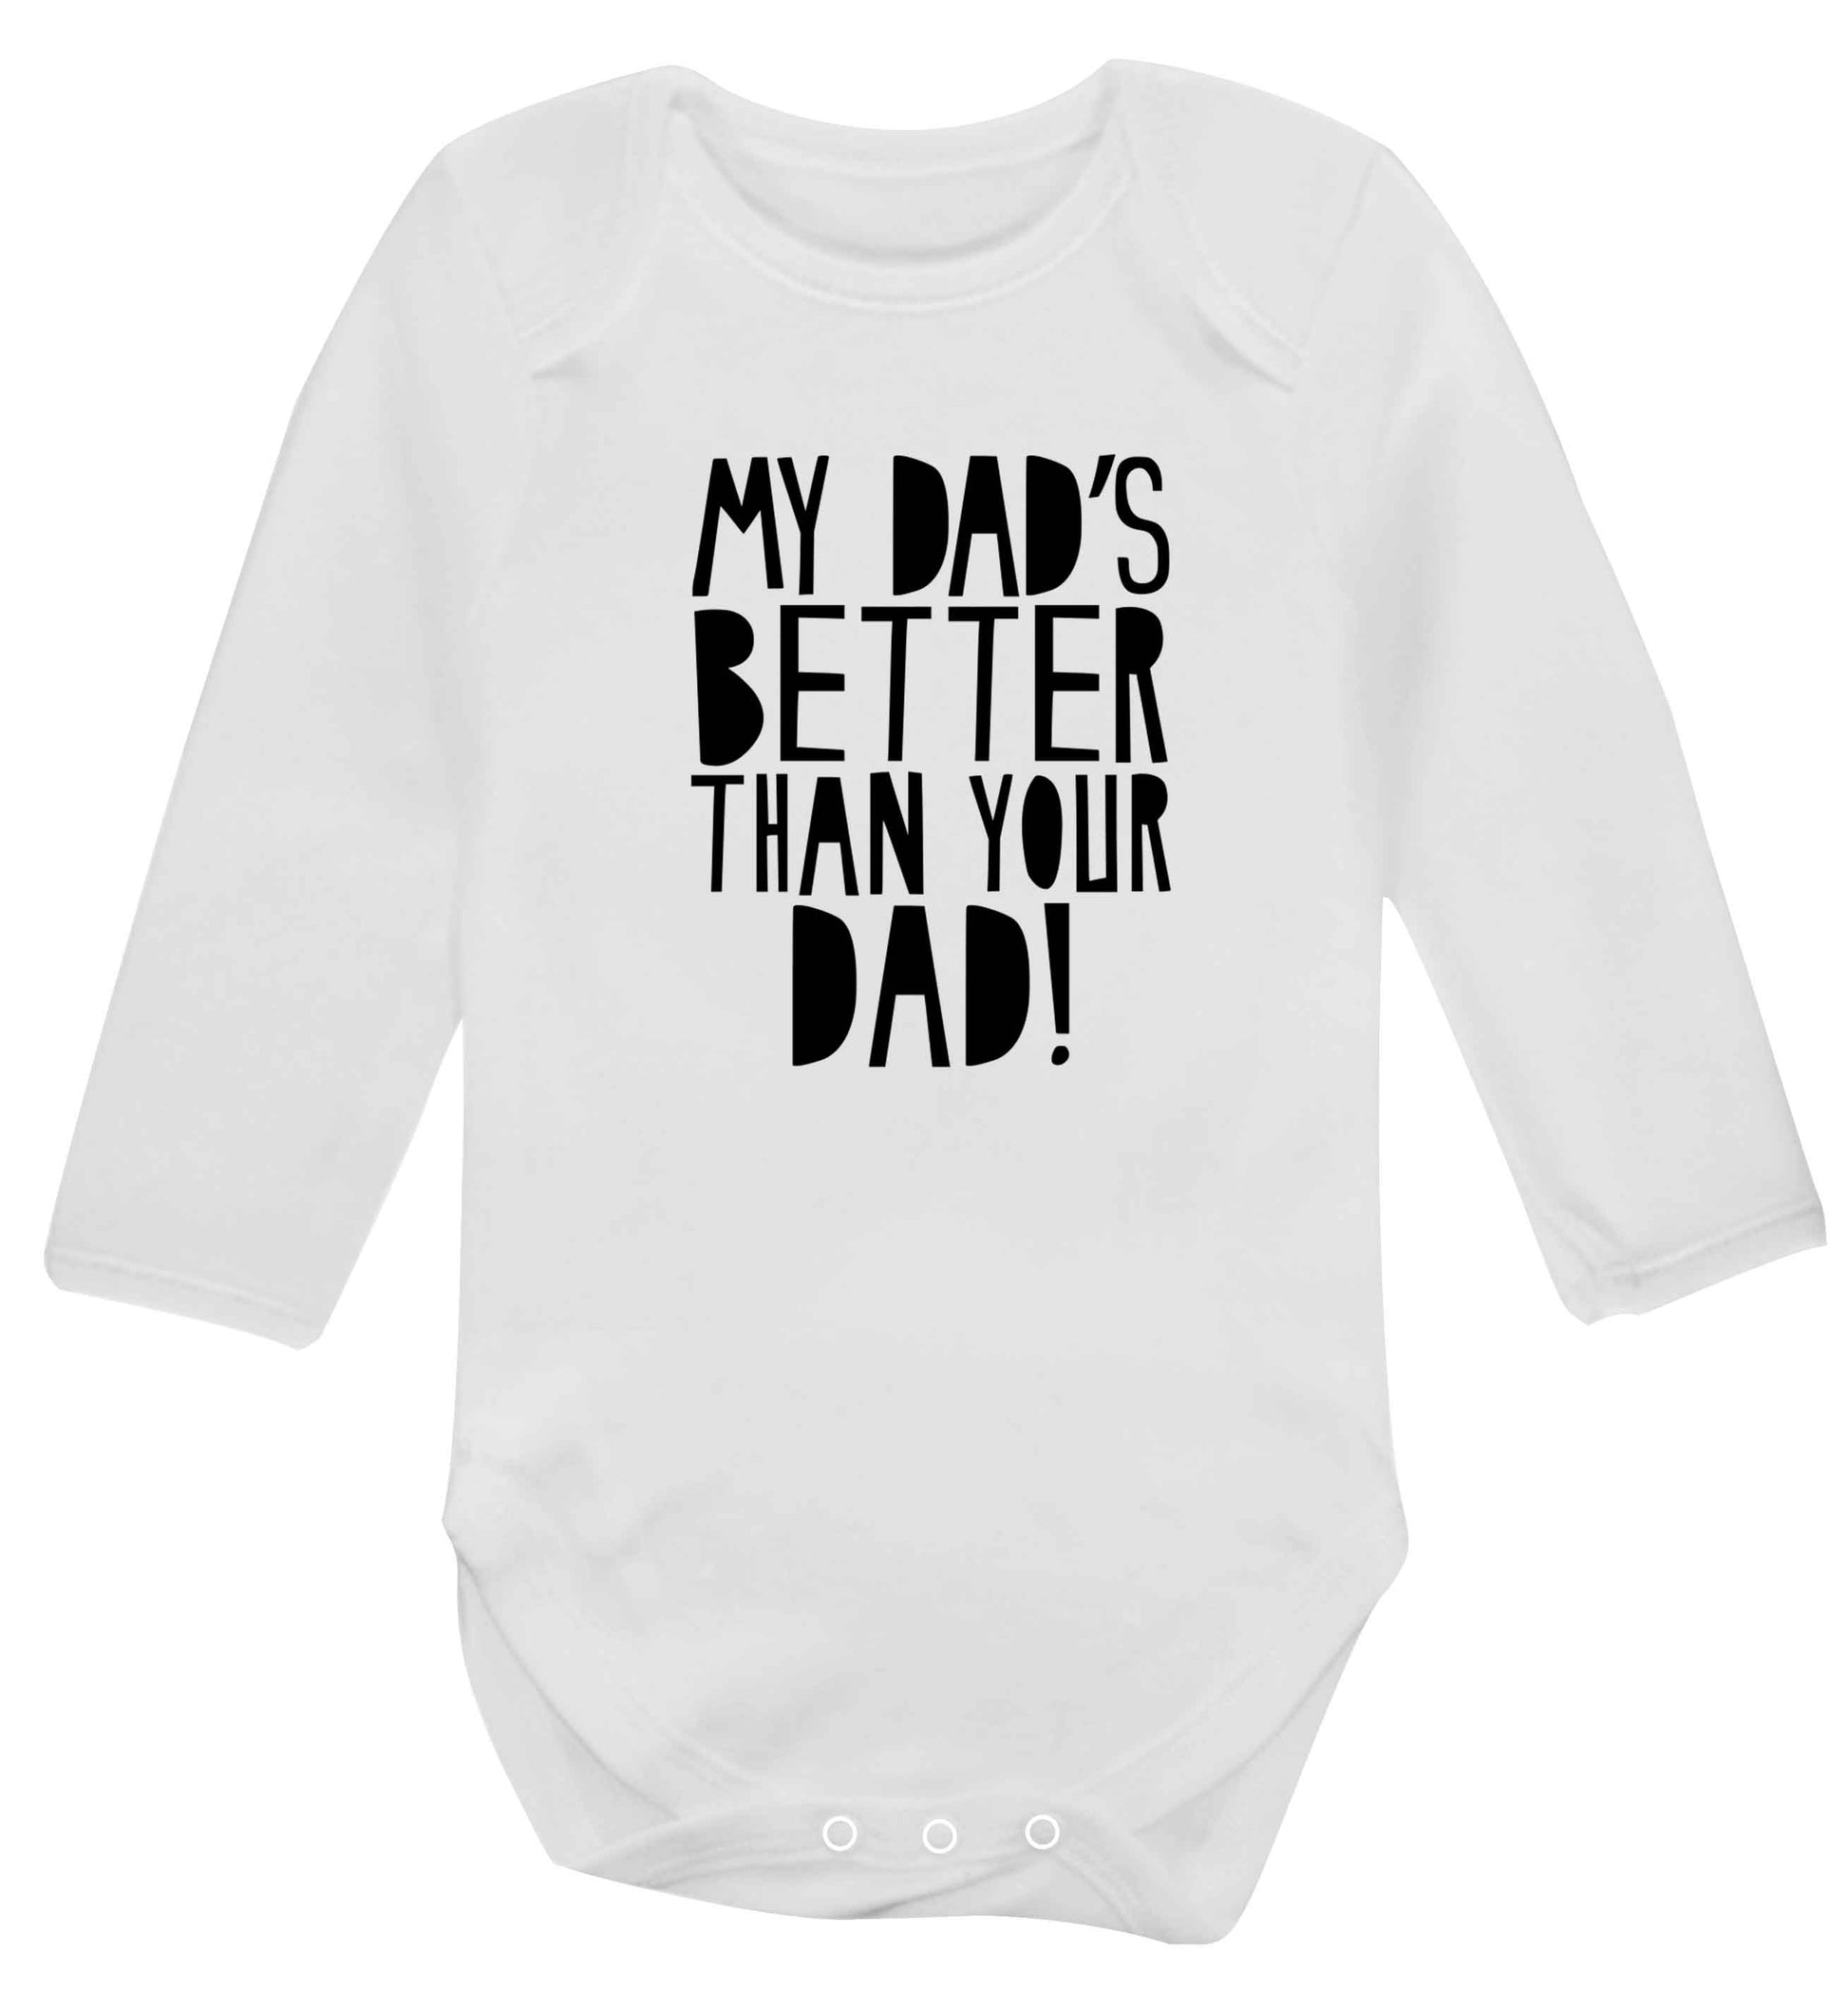 My dad's better than your dad! baby vest long sleeved white 6-12 months